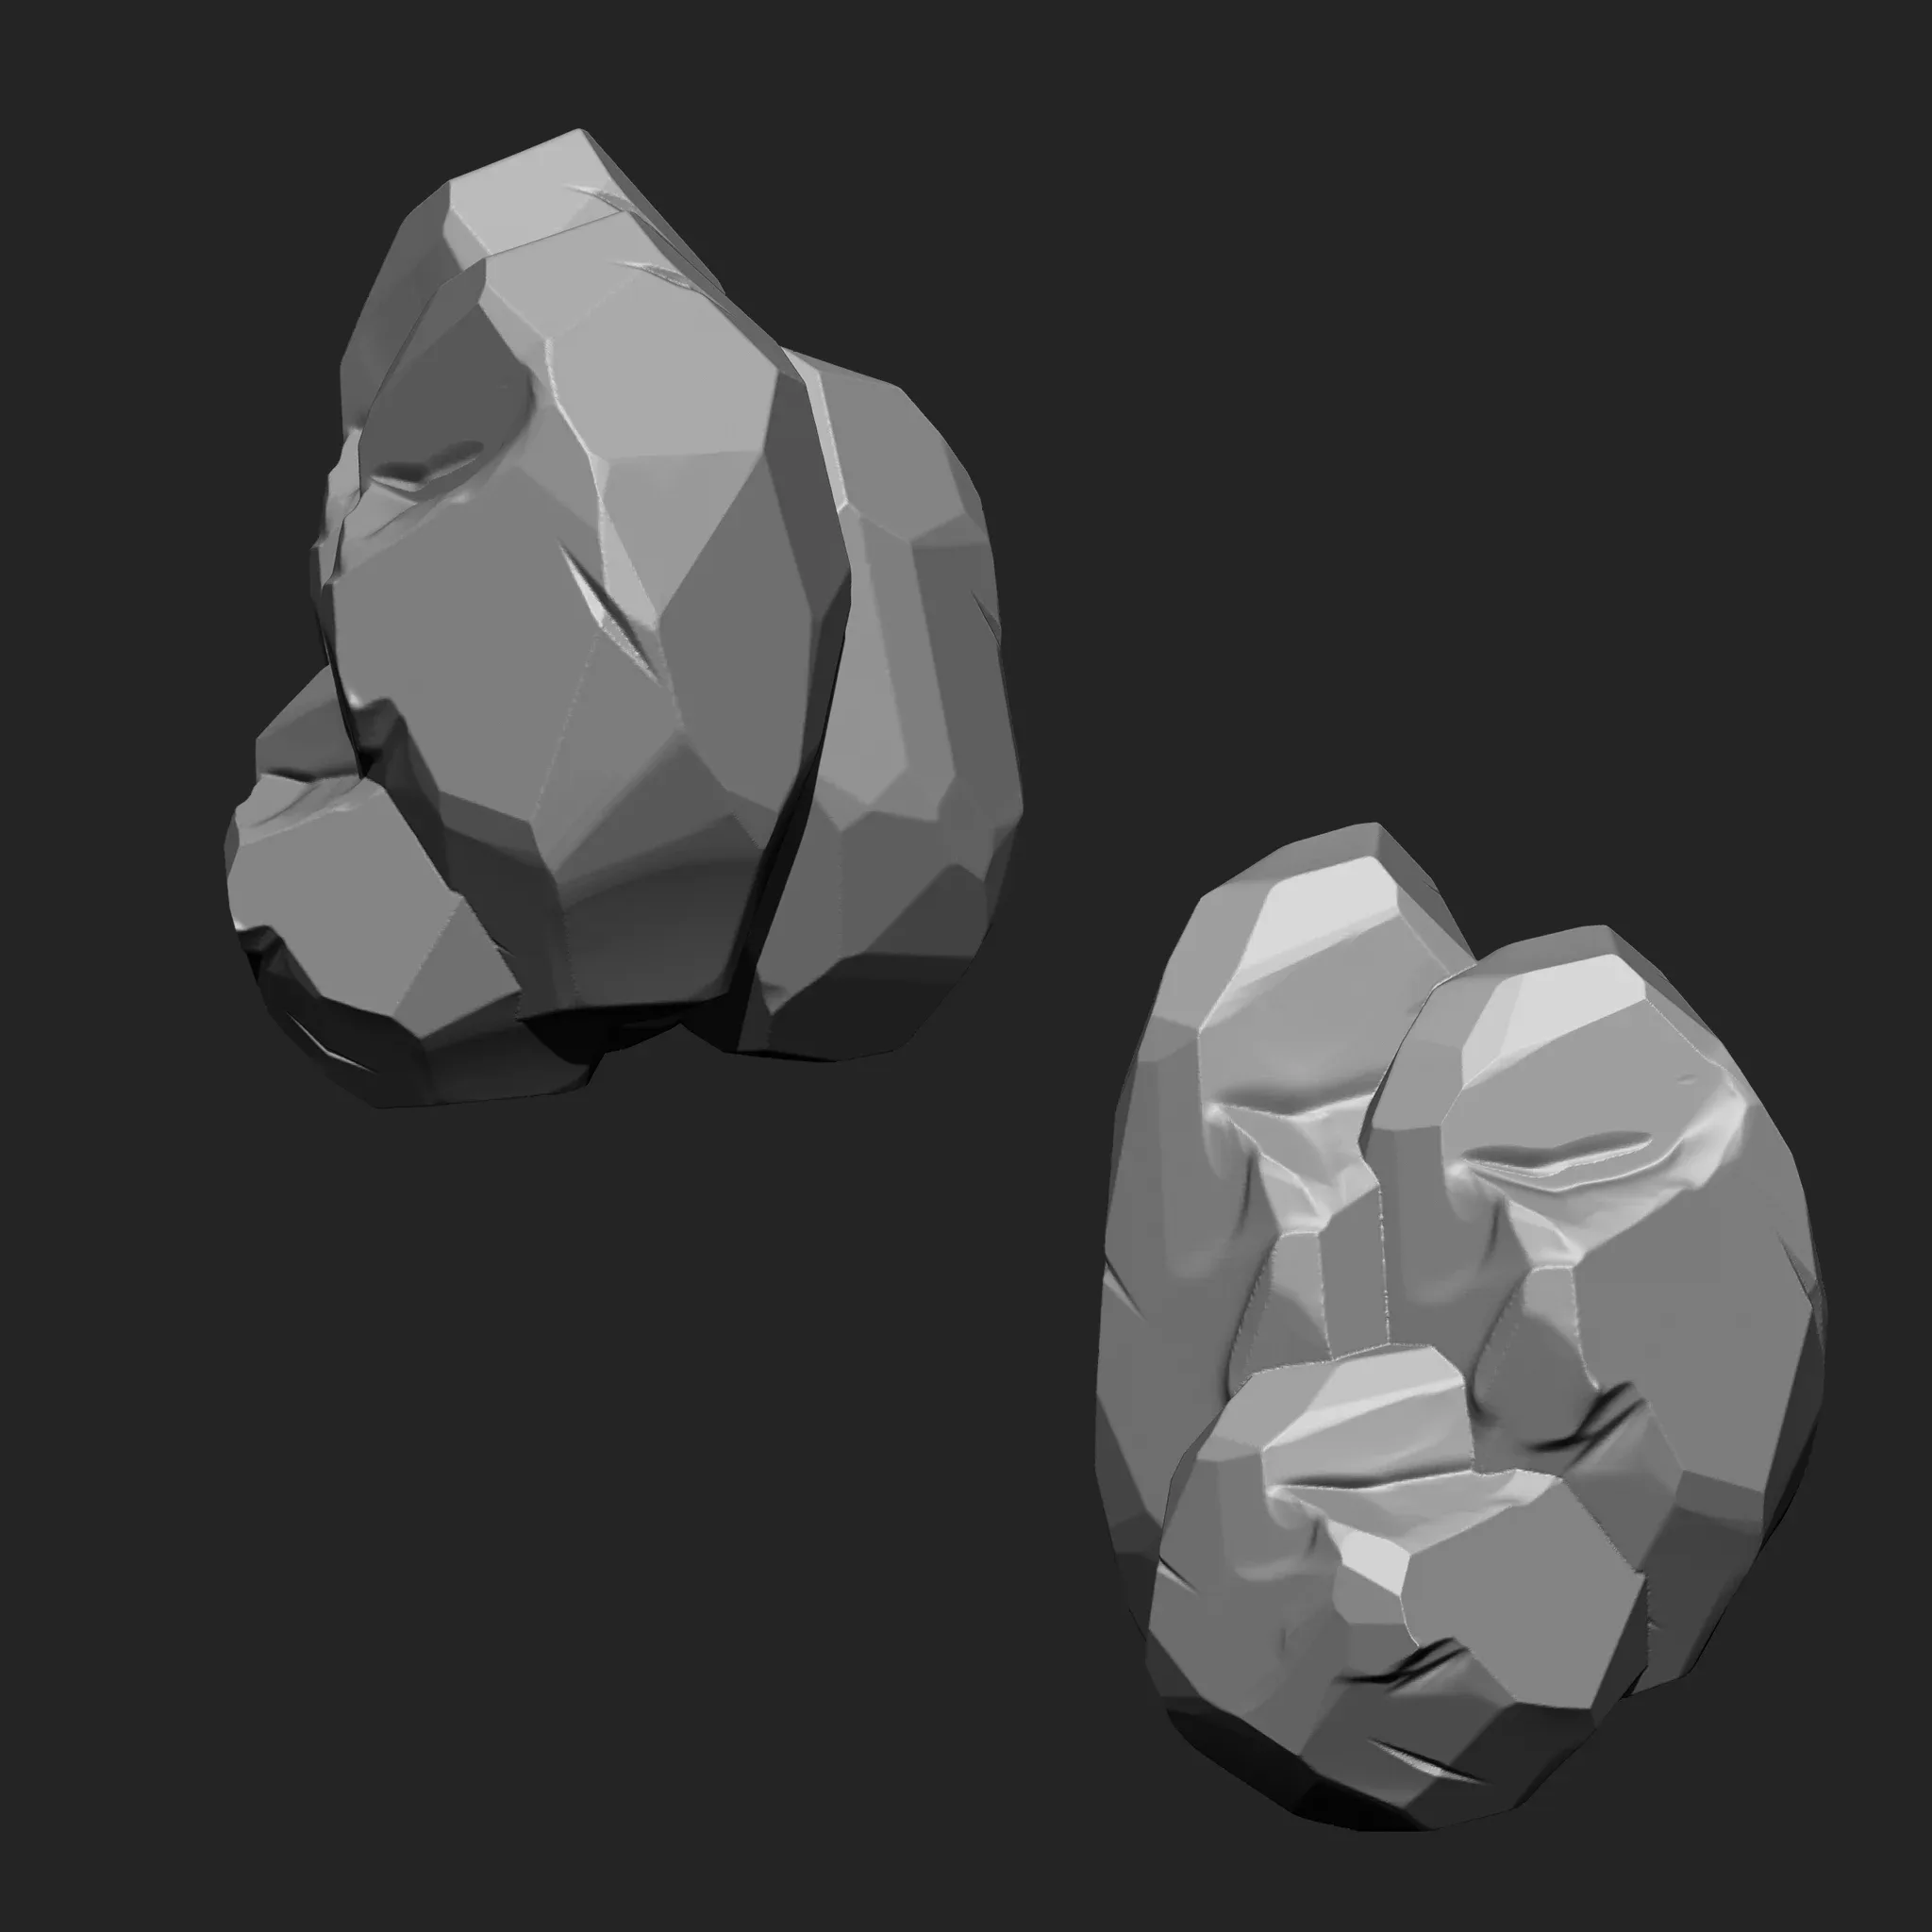 Stylized Rock IMM Brushes 25 in one Vol. 2